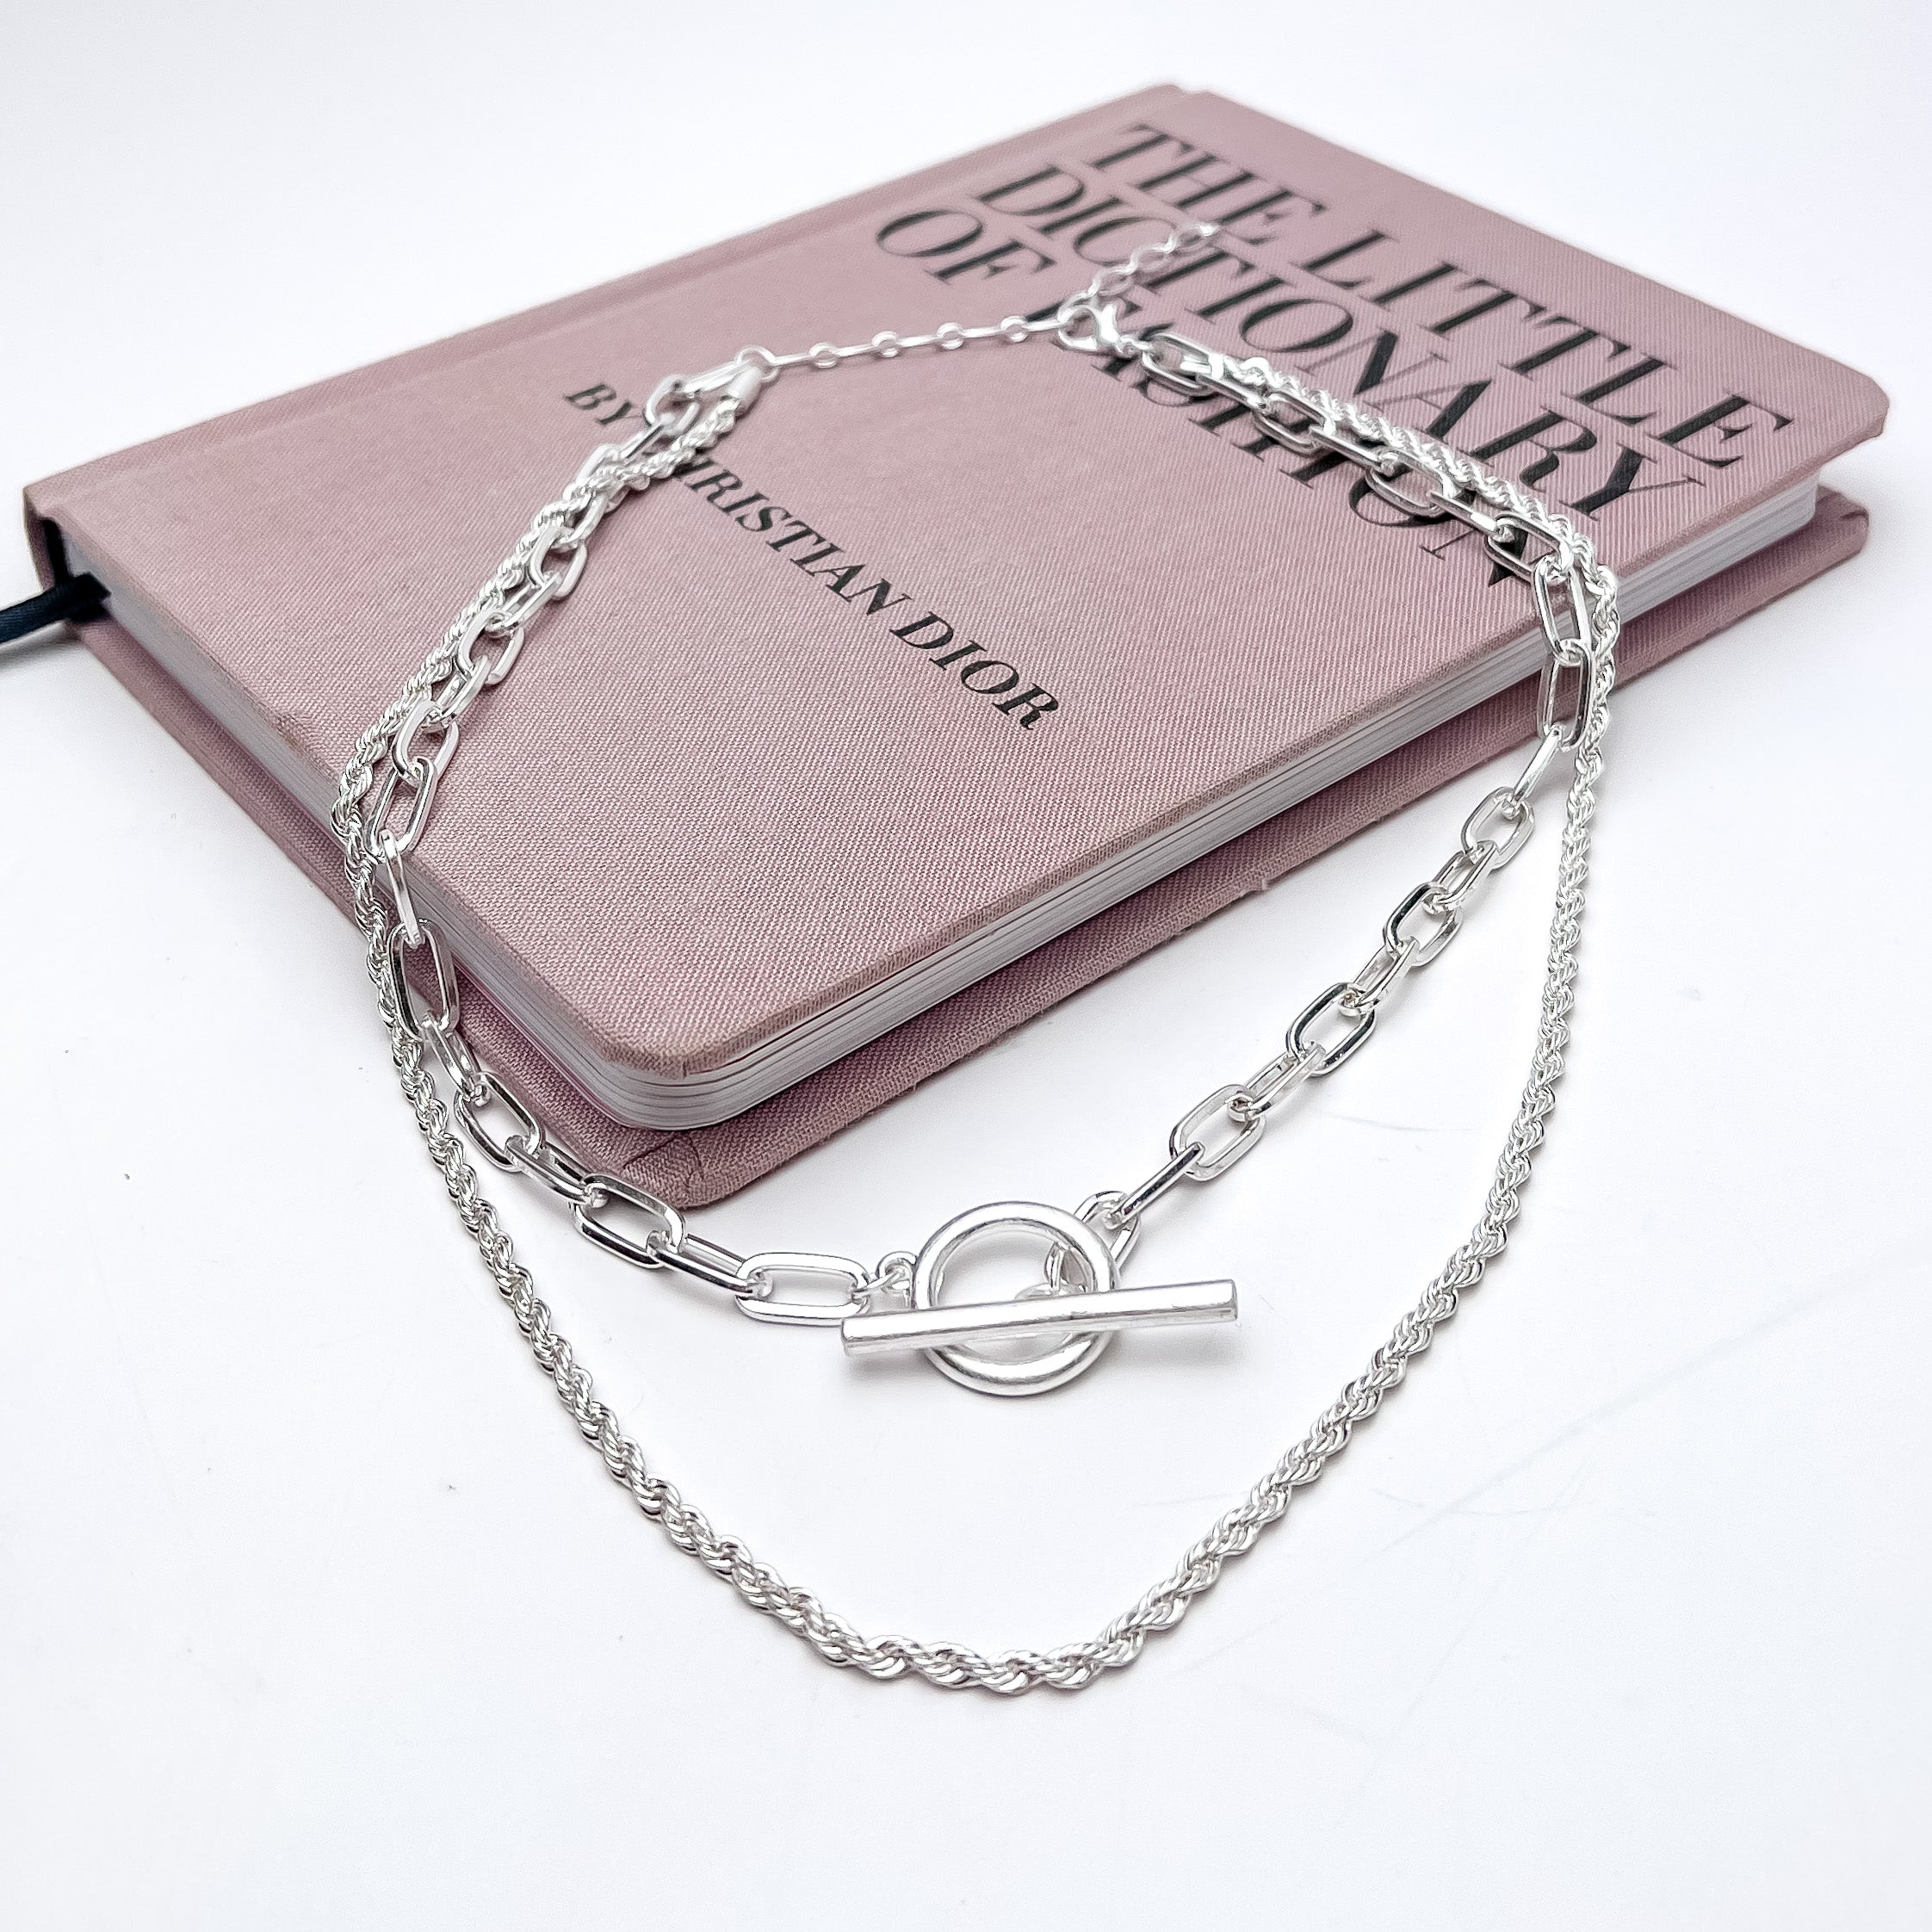 Double Strand Silver Tone Necklace With Front Toggle. This necklace is pictured laying on a pink book with a white background.